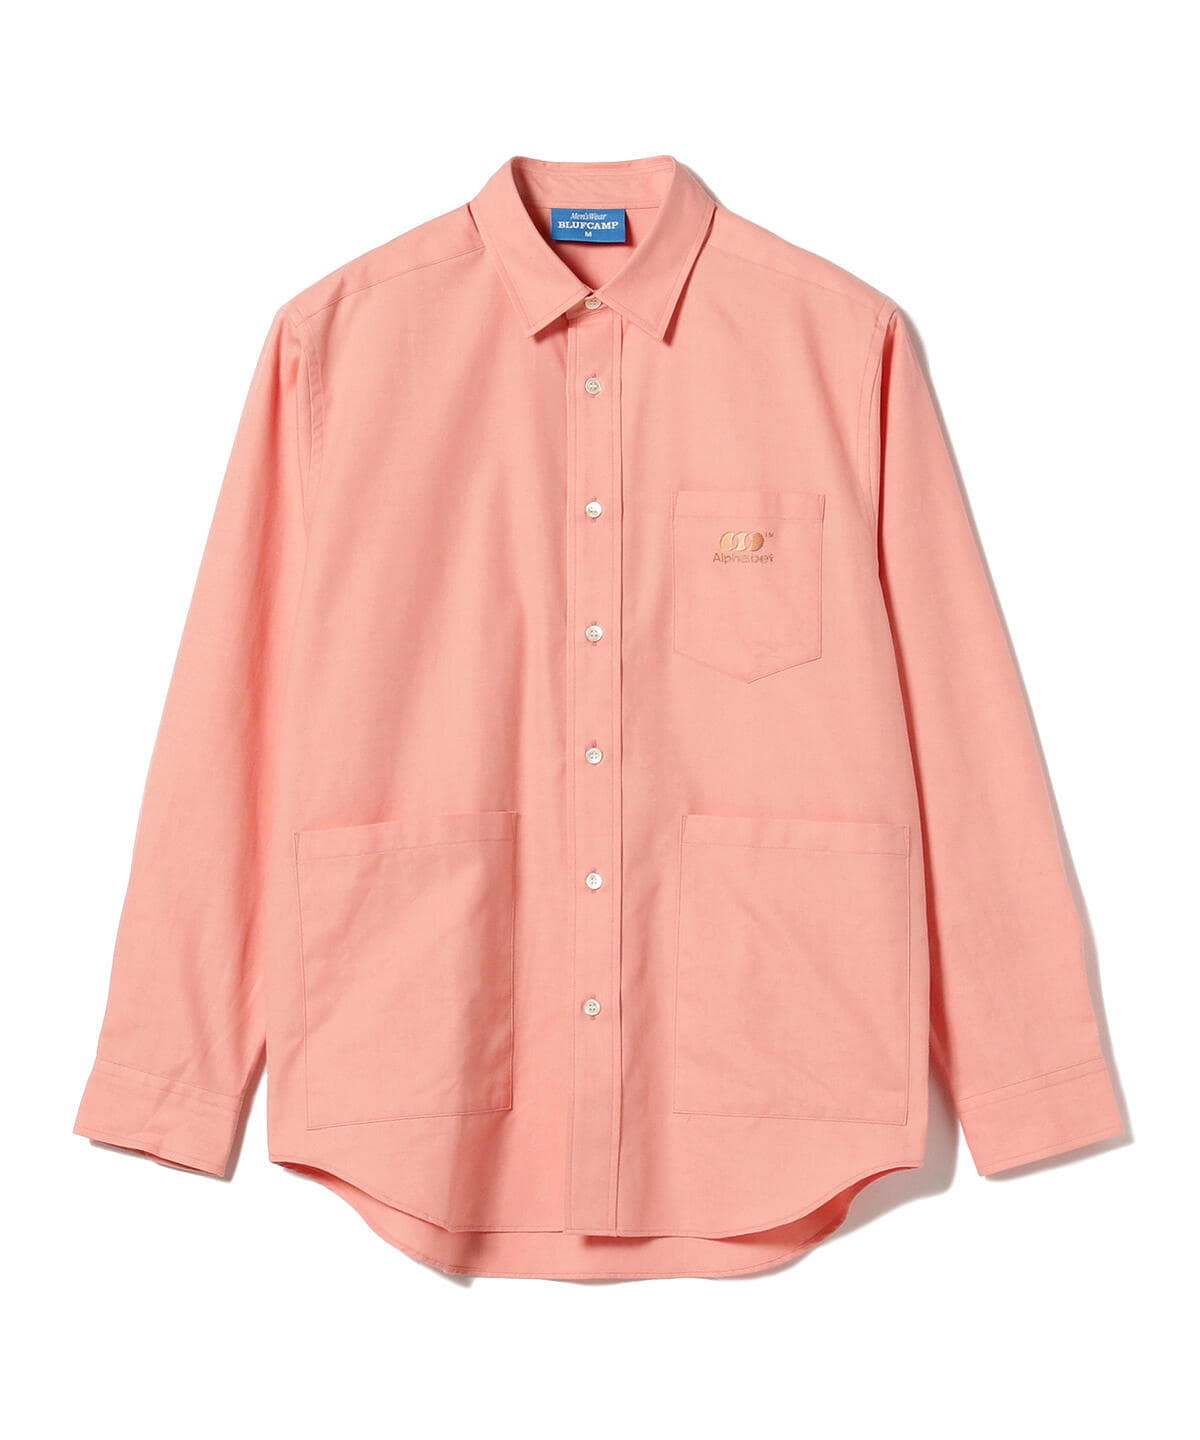 BEAMS（ビームス）【アウトレット】BLUFCAMP / Dyed Oxford Shirt ...